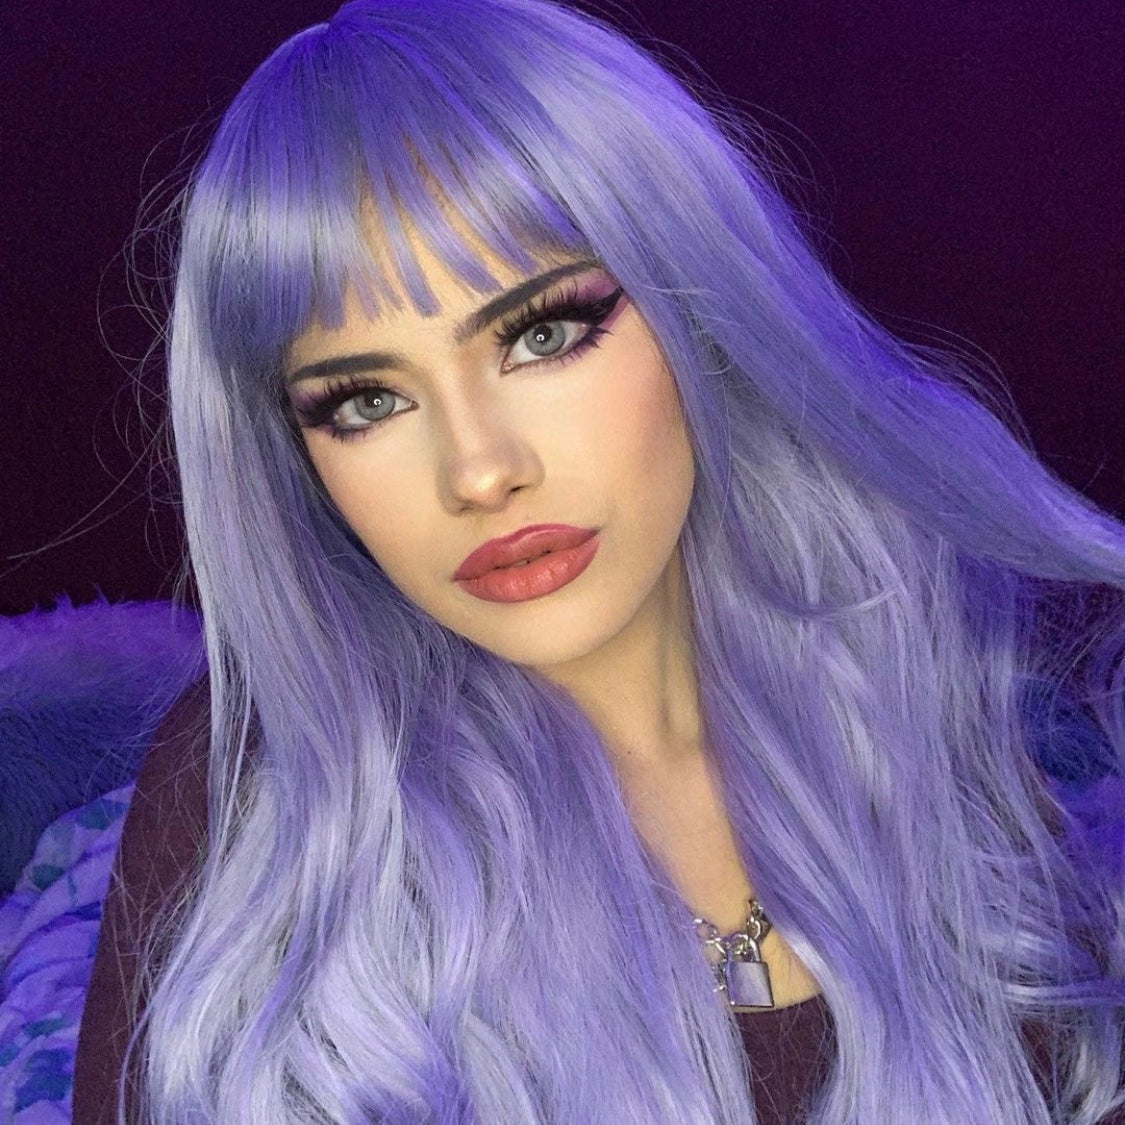 Review for Lolita long roll wig yv42131